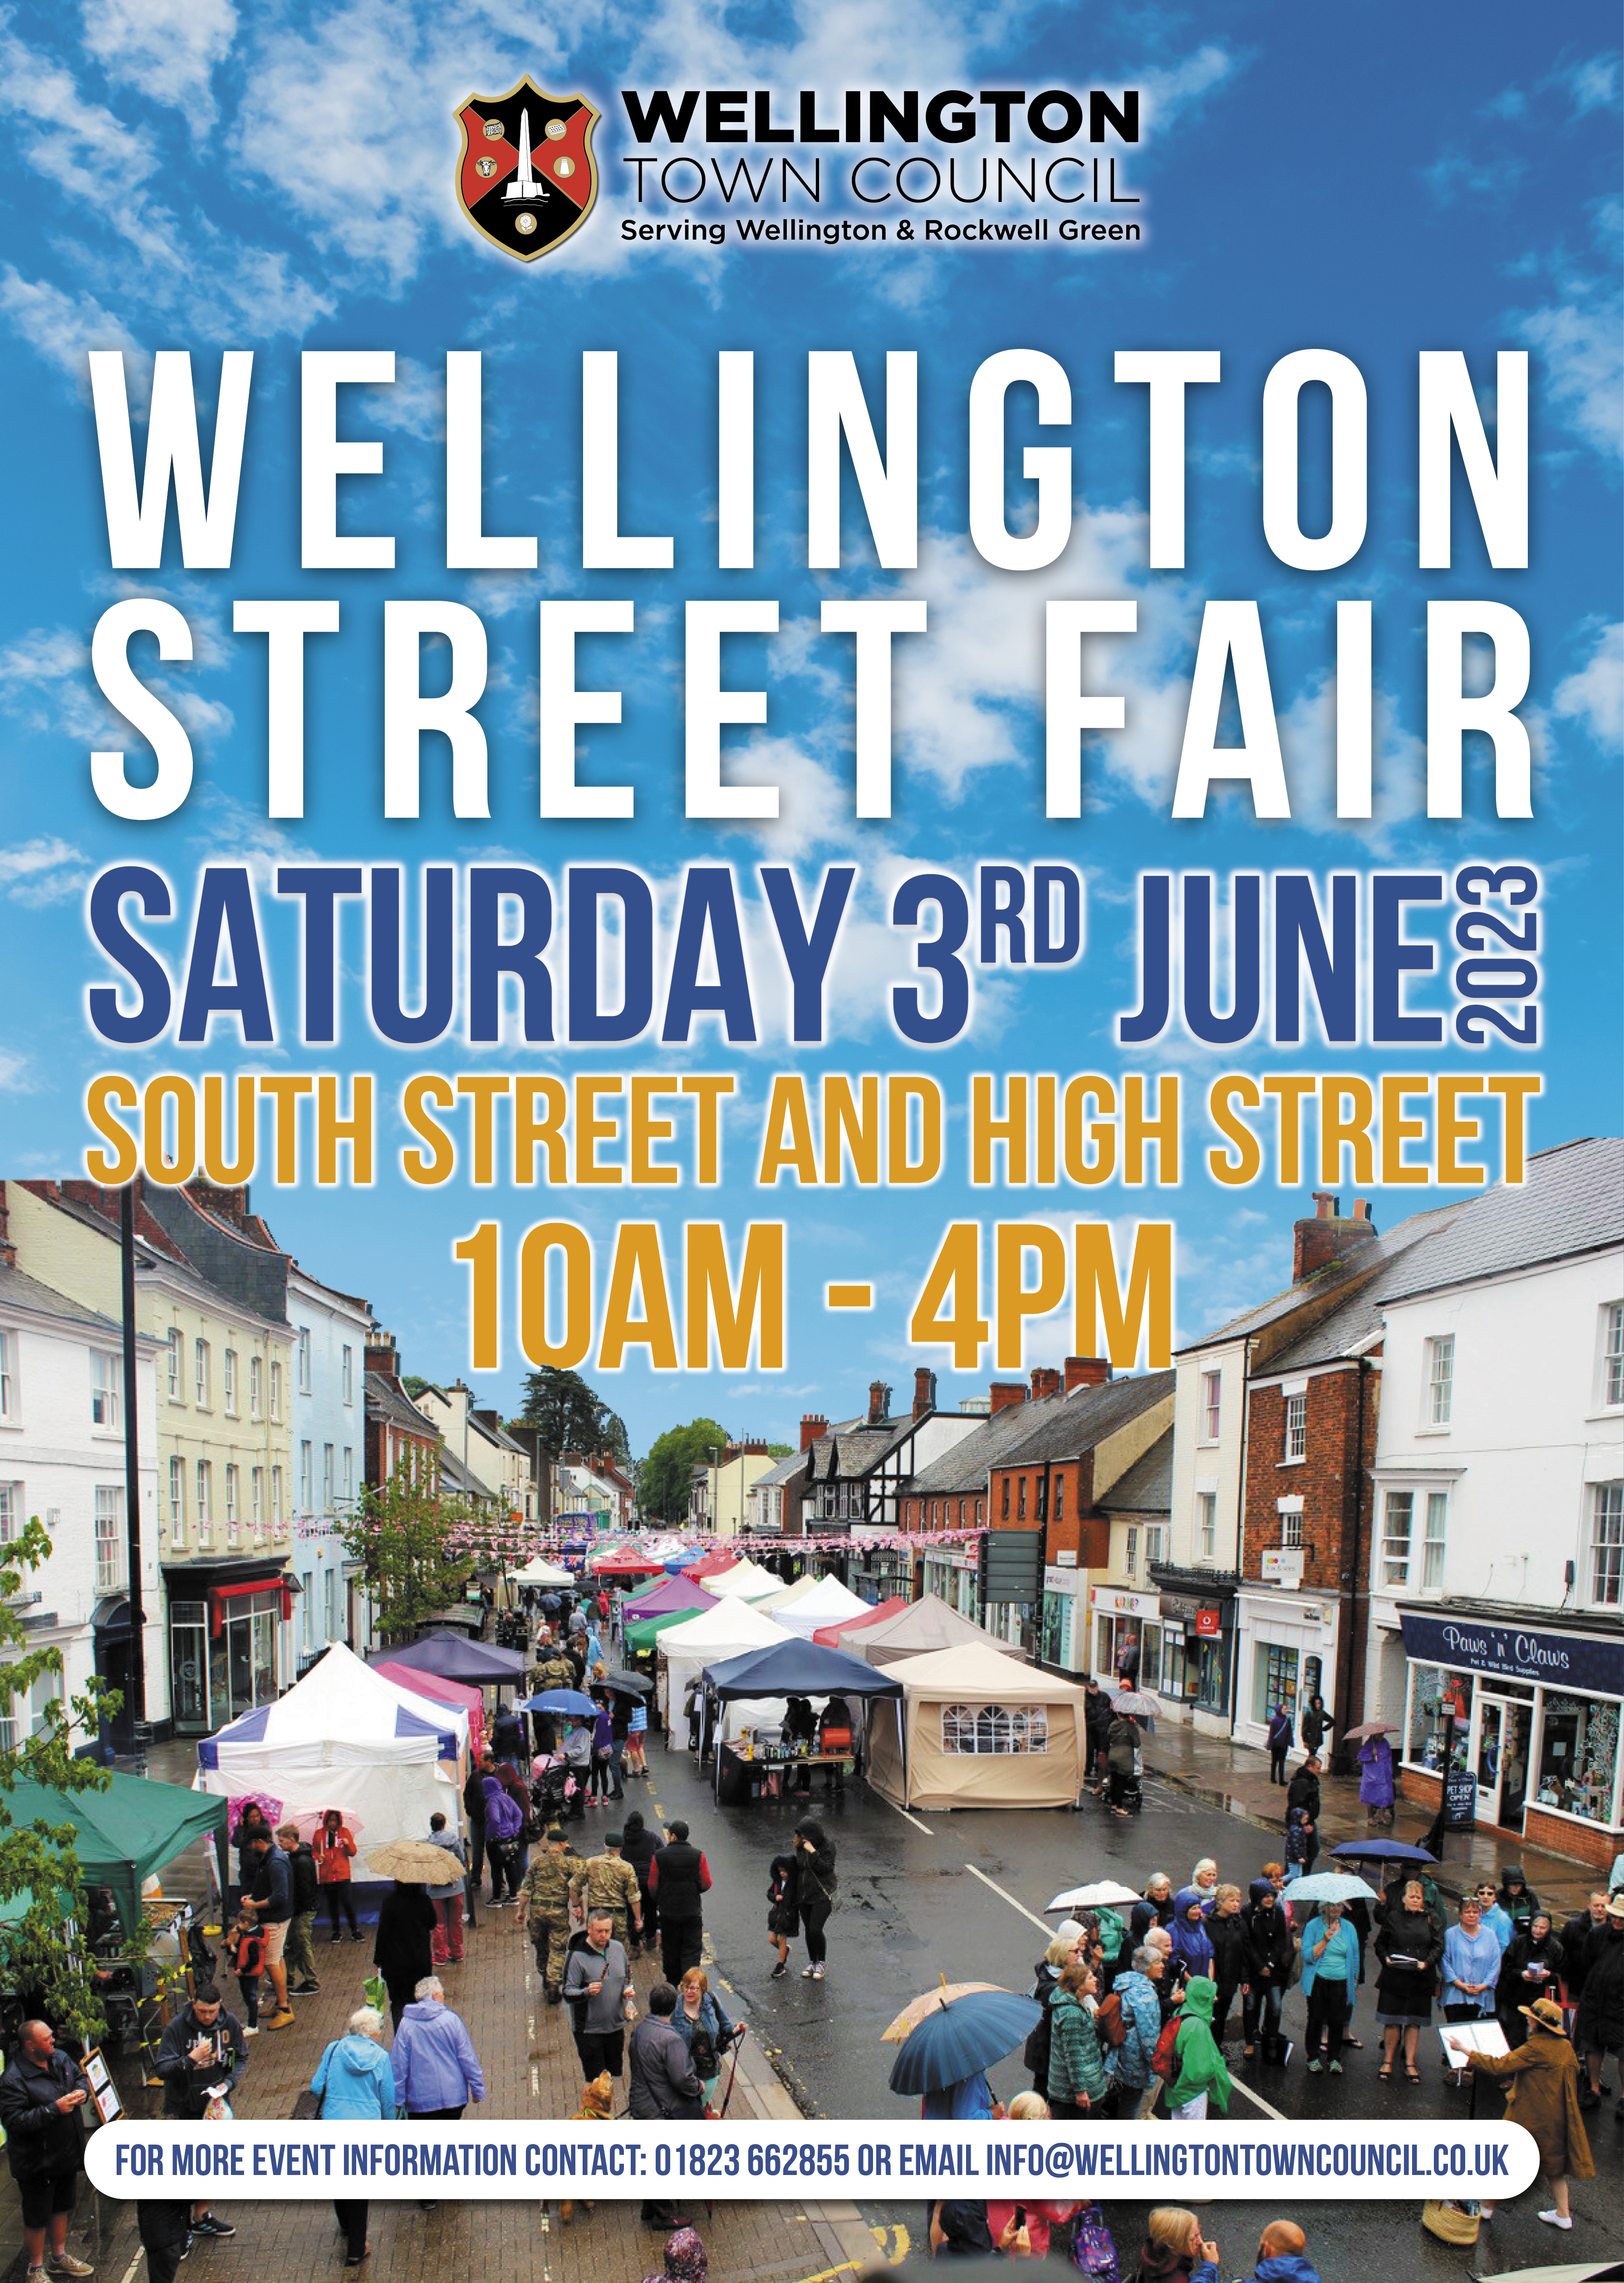 Wellington Street Fair Saturday 3rd June 2023. South street and High Street. 10am-4pm. For more info contact 01823662855 or info@wellingtontowncouncil.co.uk